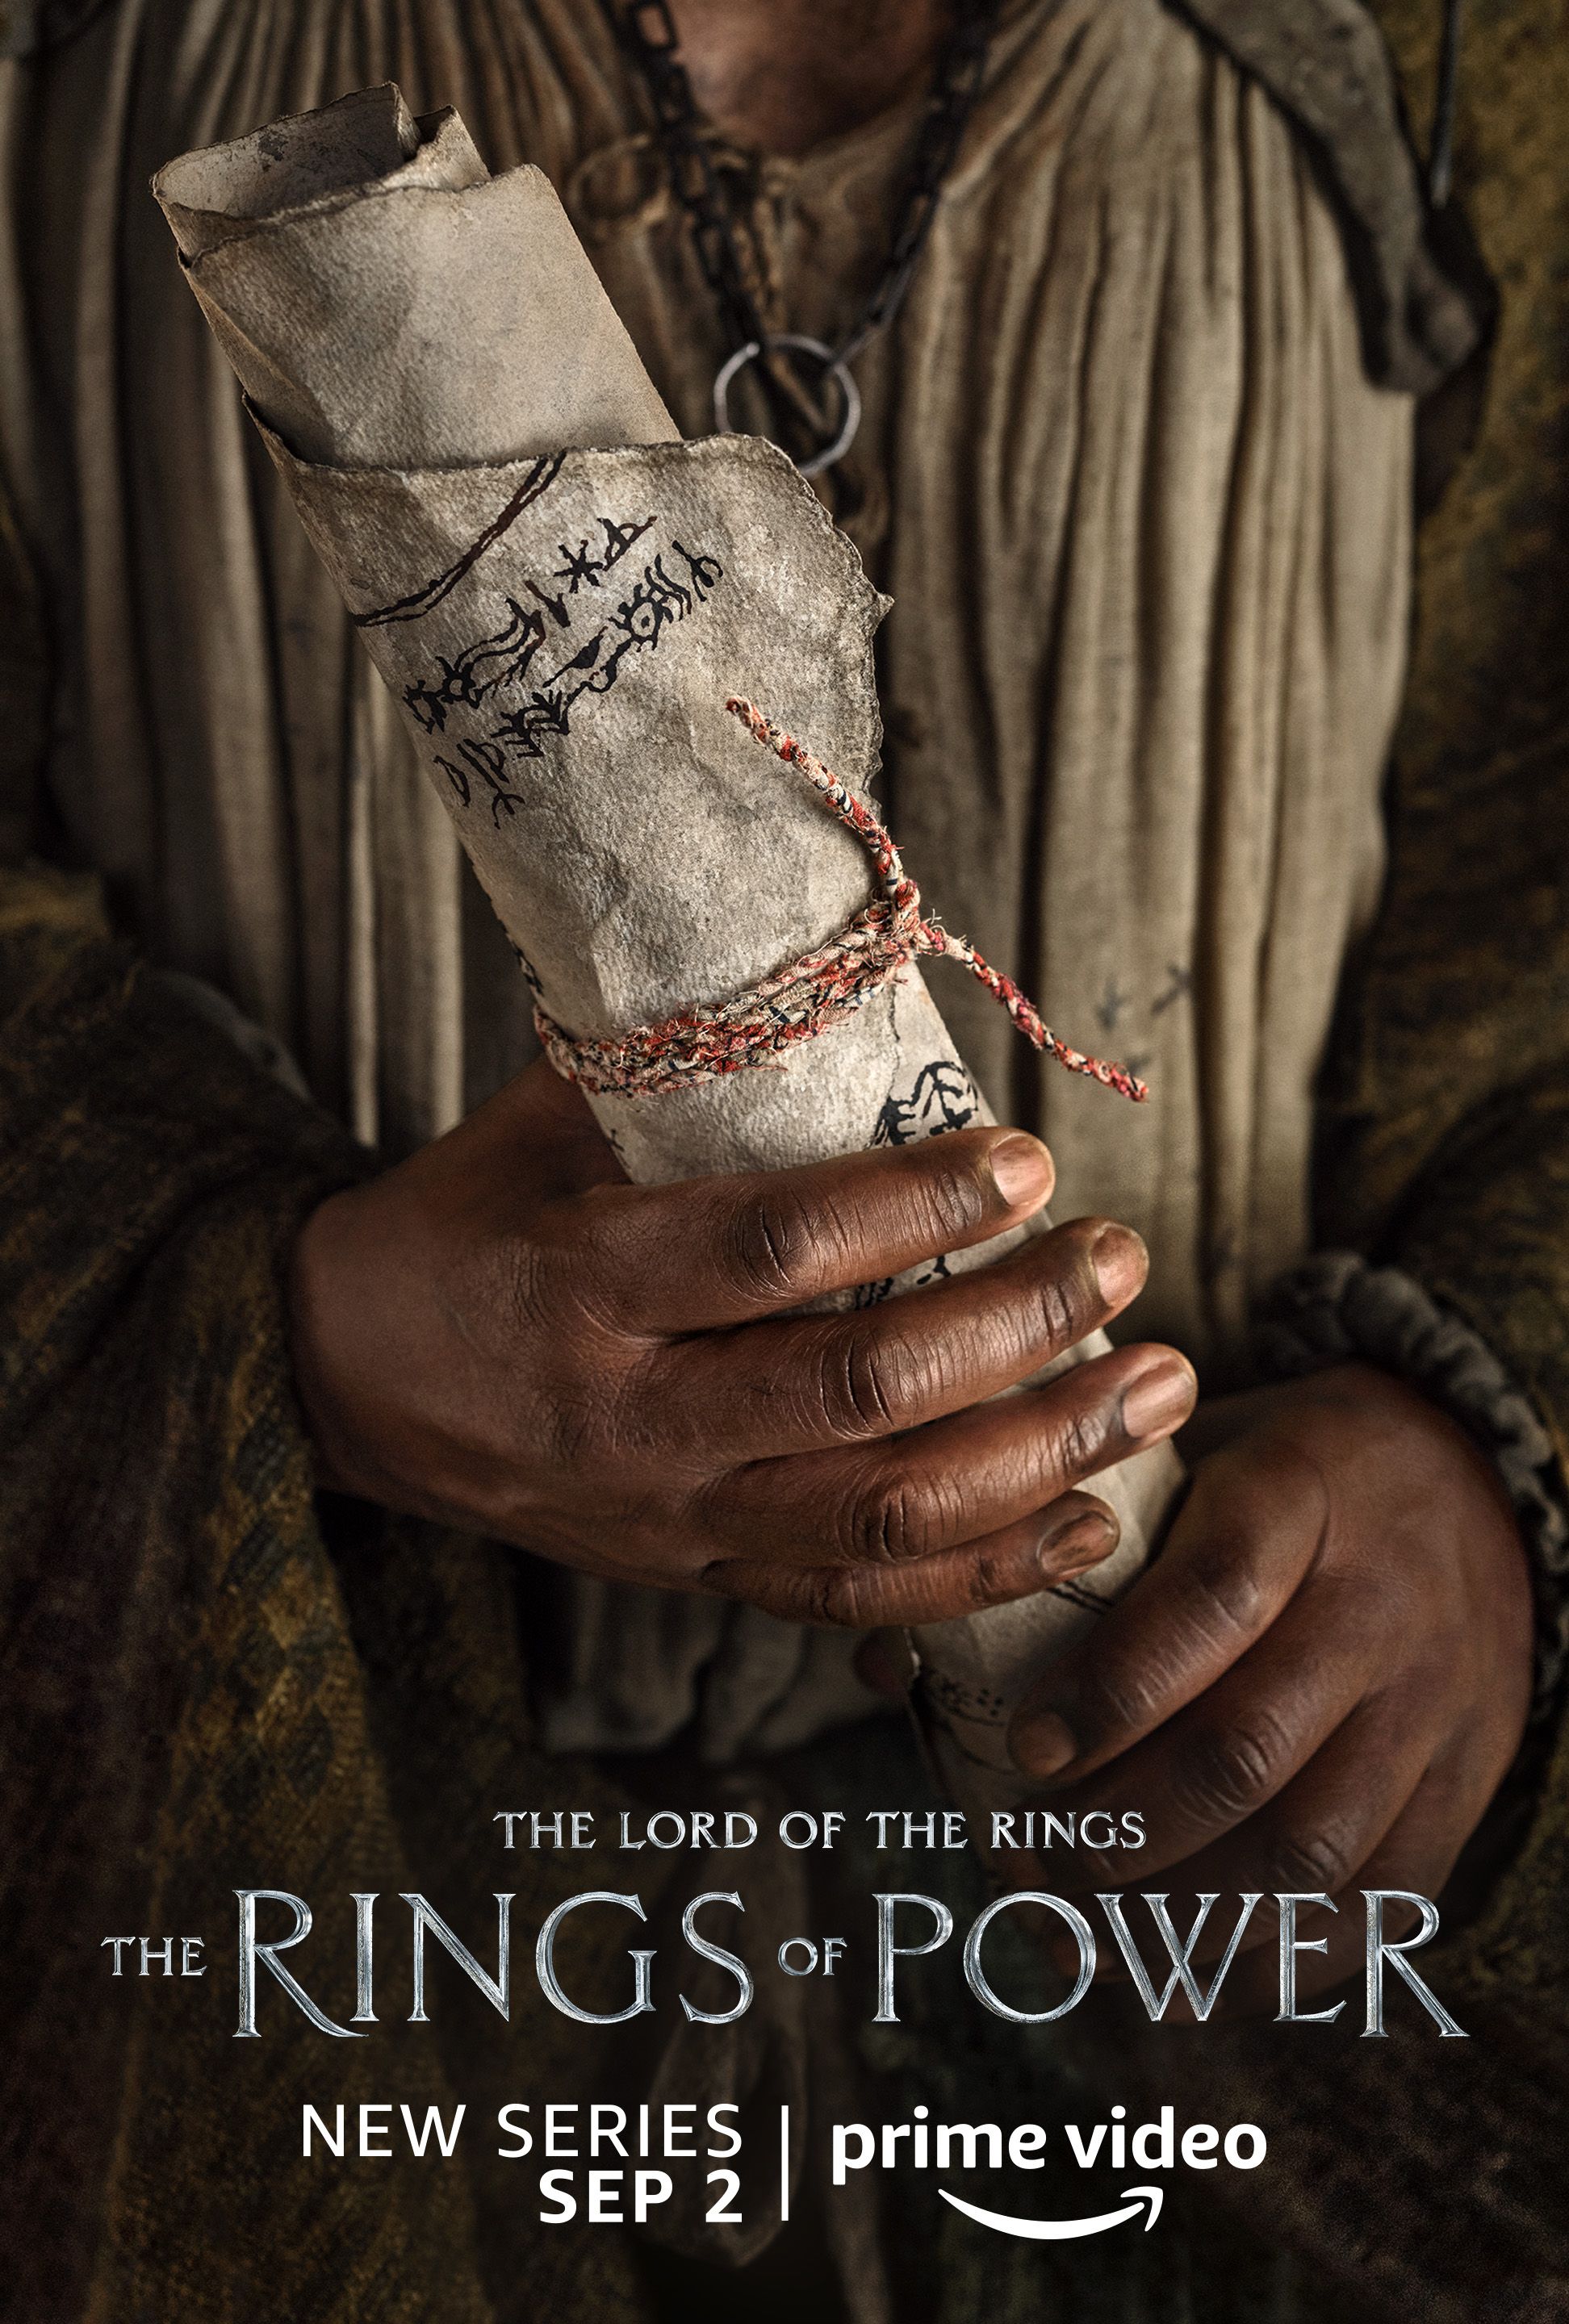 rings of power character poster 2